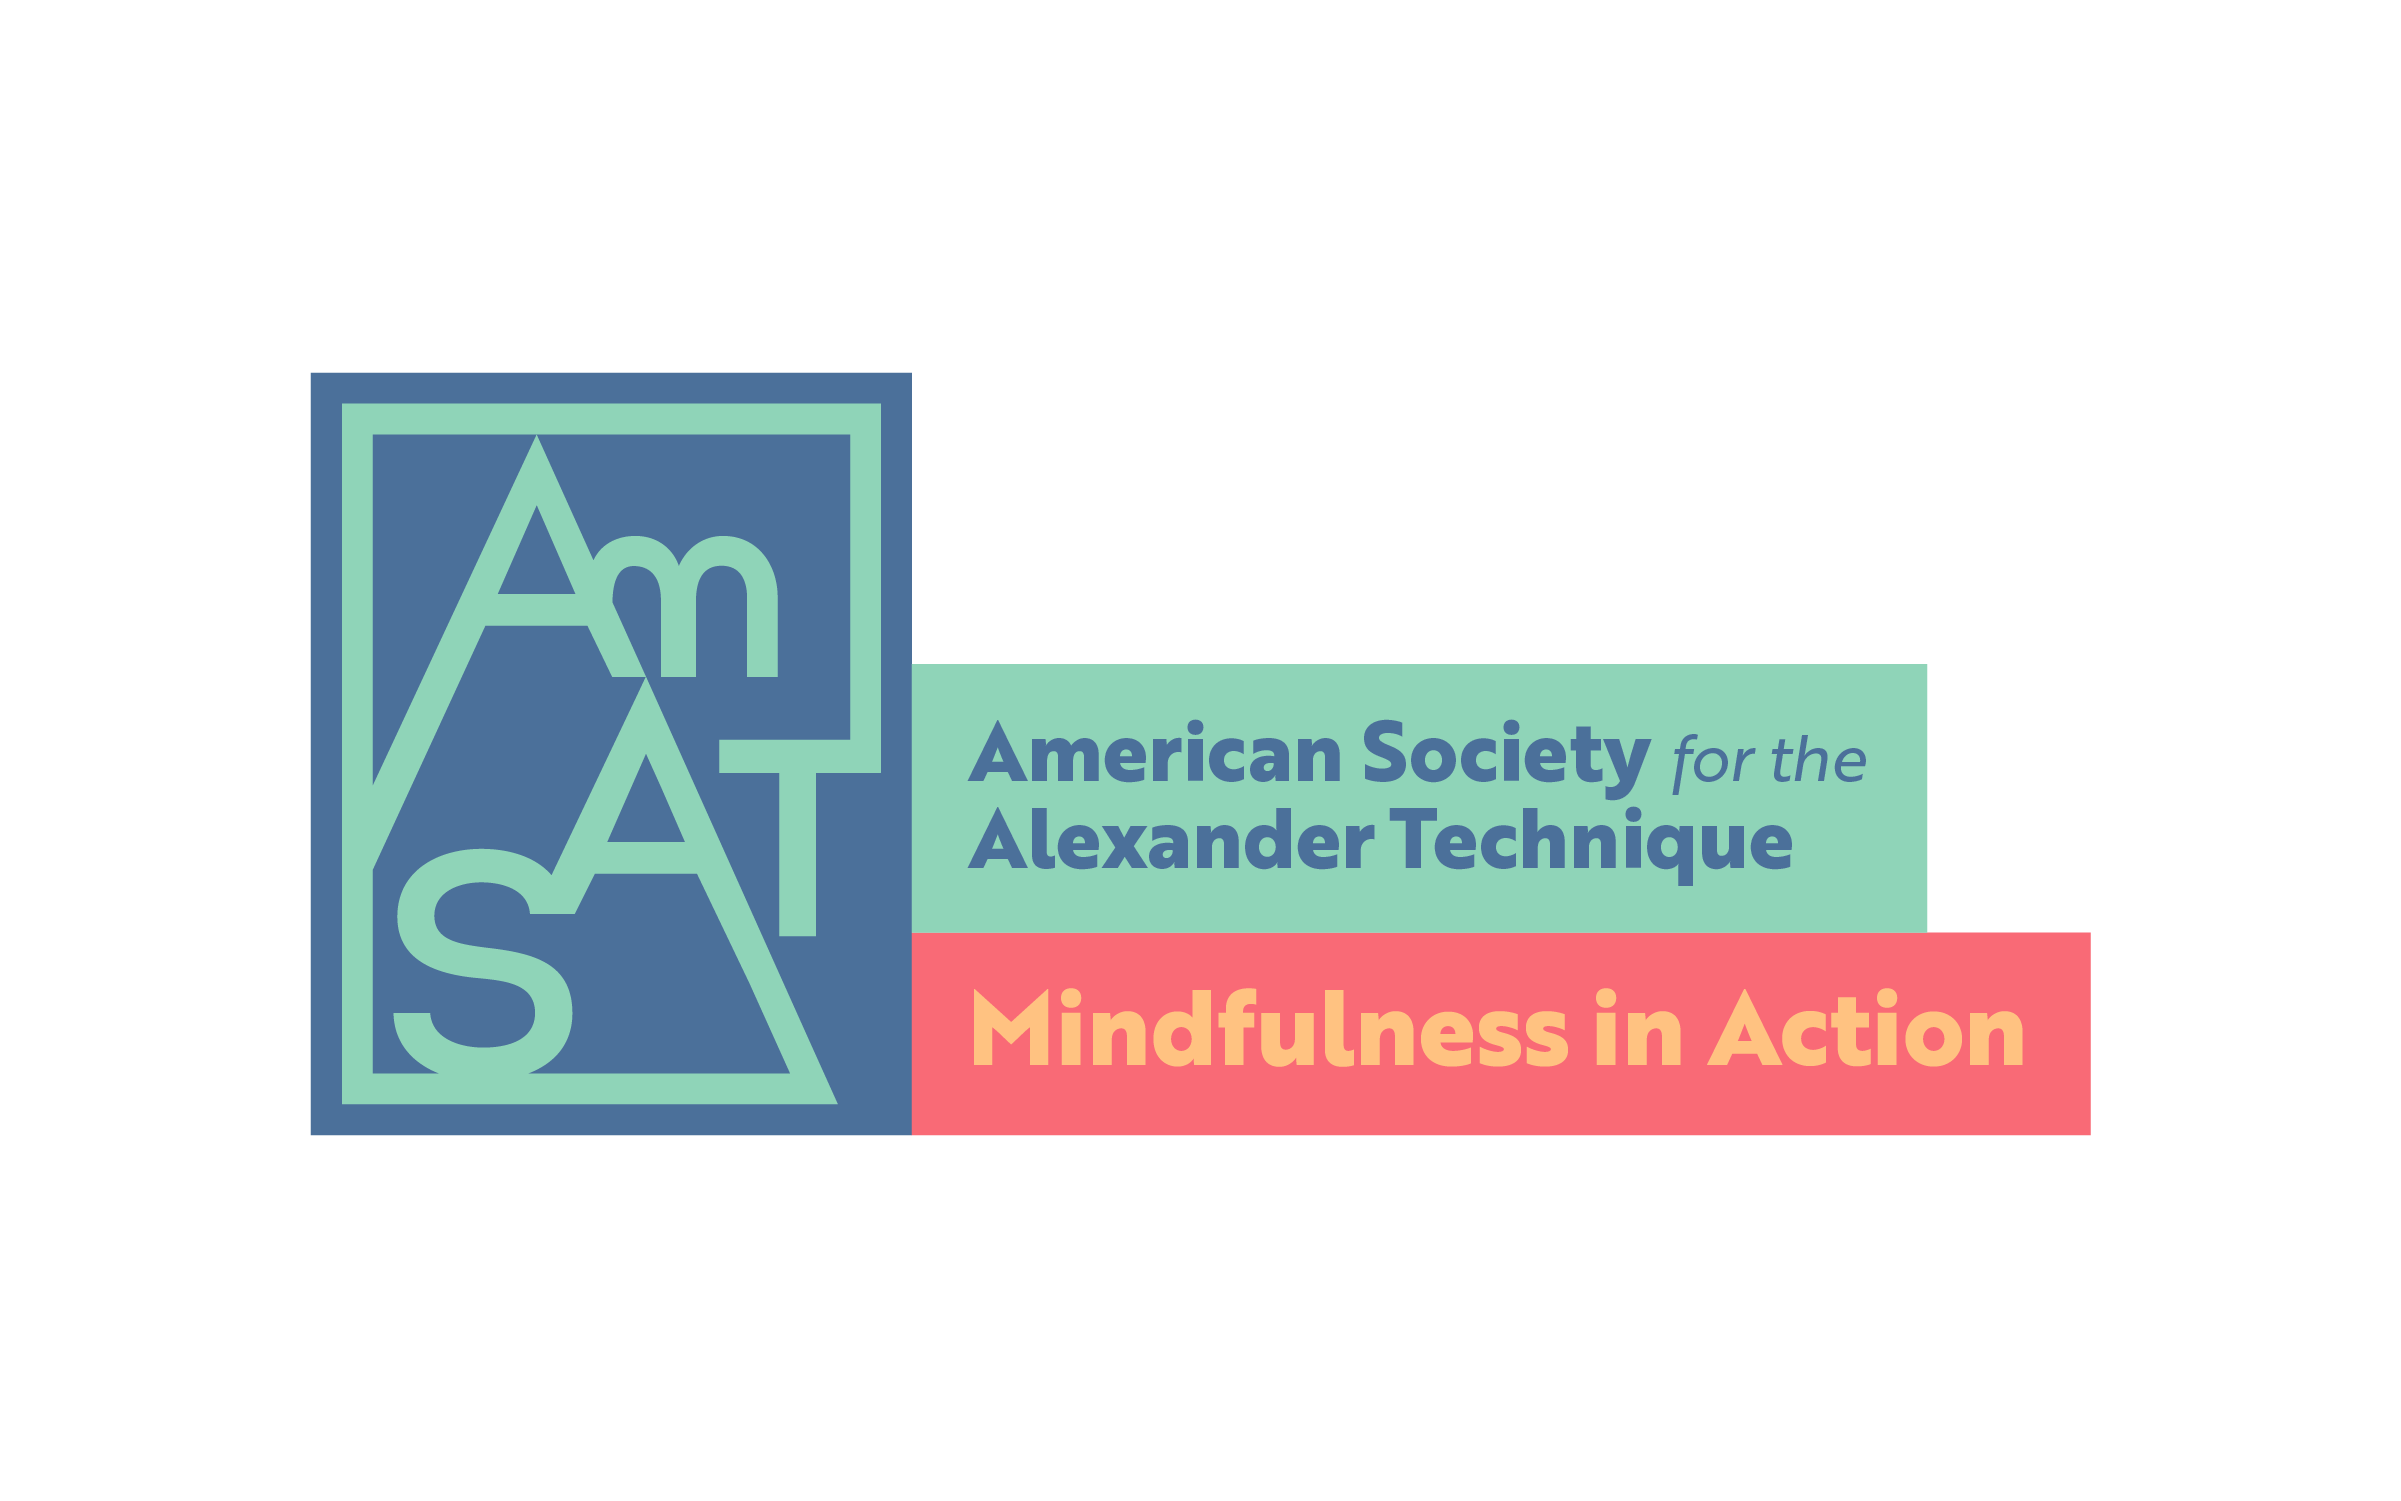 AmSAT logo, Aemricaan. Society for the Alexander Technique, Mindfulness in Action